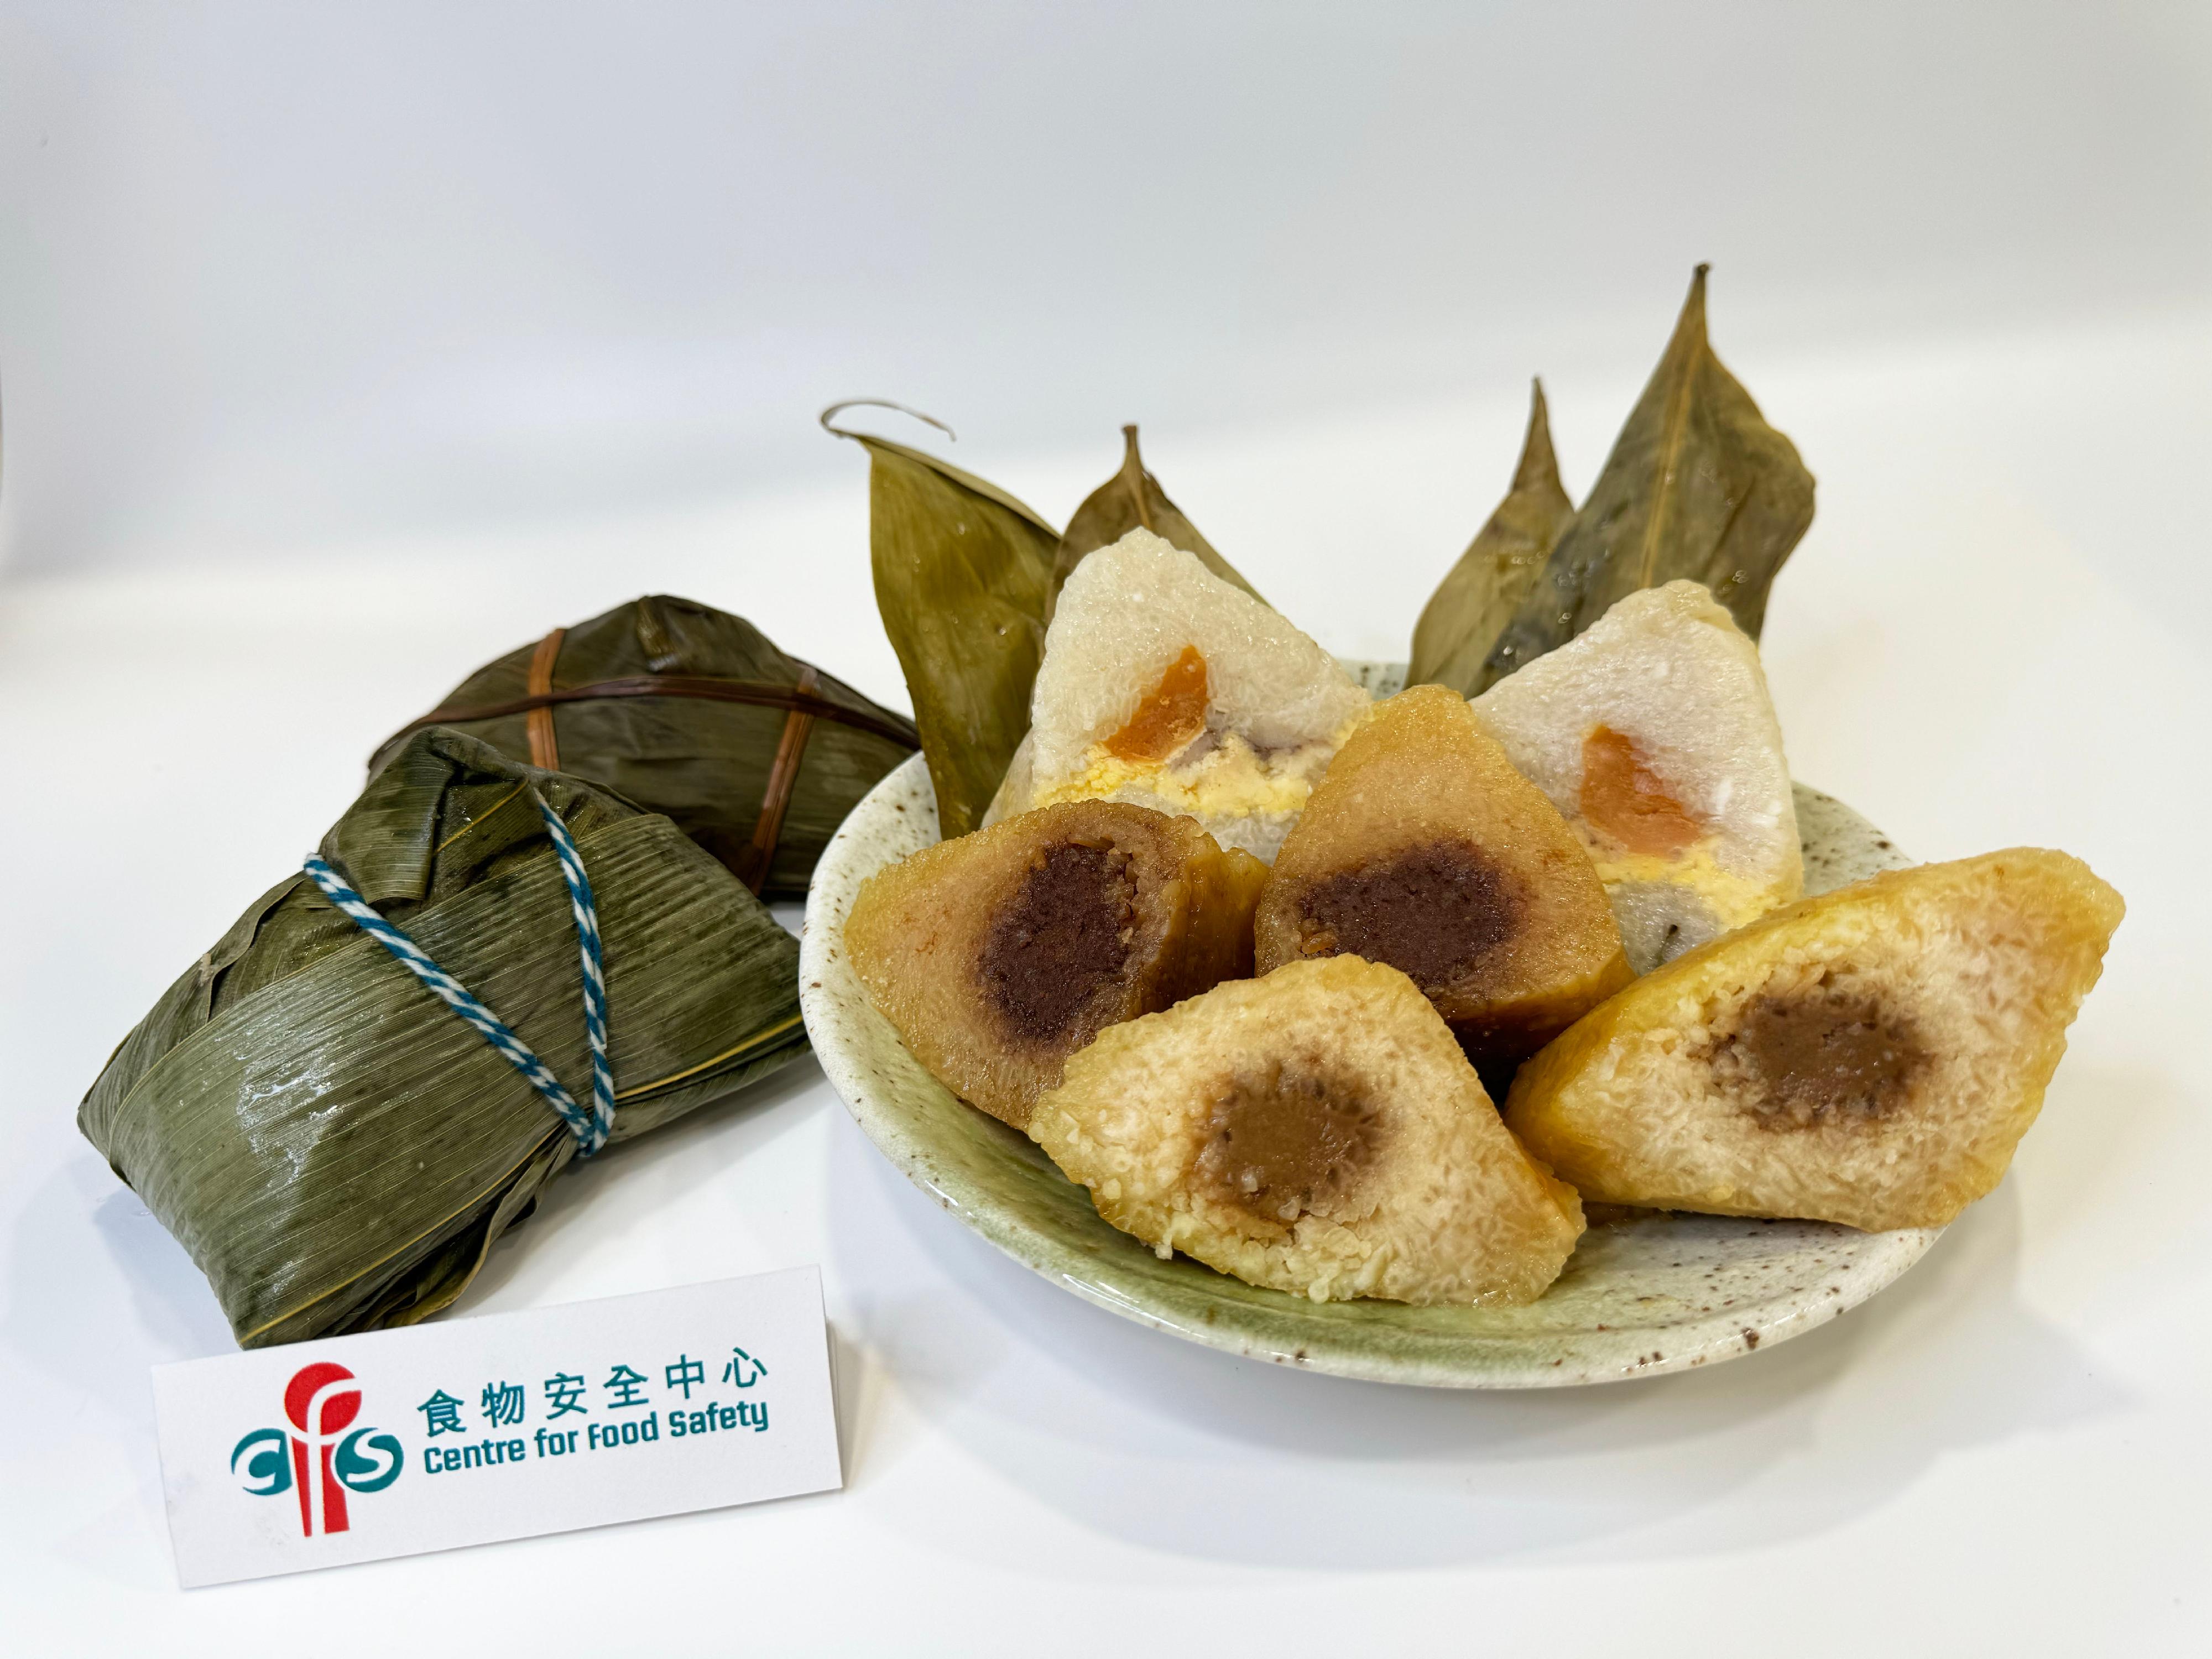 The Centre for Food Safety of the Food and Environmental Hygiene Department today (May 27) announced that the test results of 46 samples collected under the seasonal food surveillance project on rice dumplings (first phase) were all satisfactory.